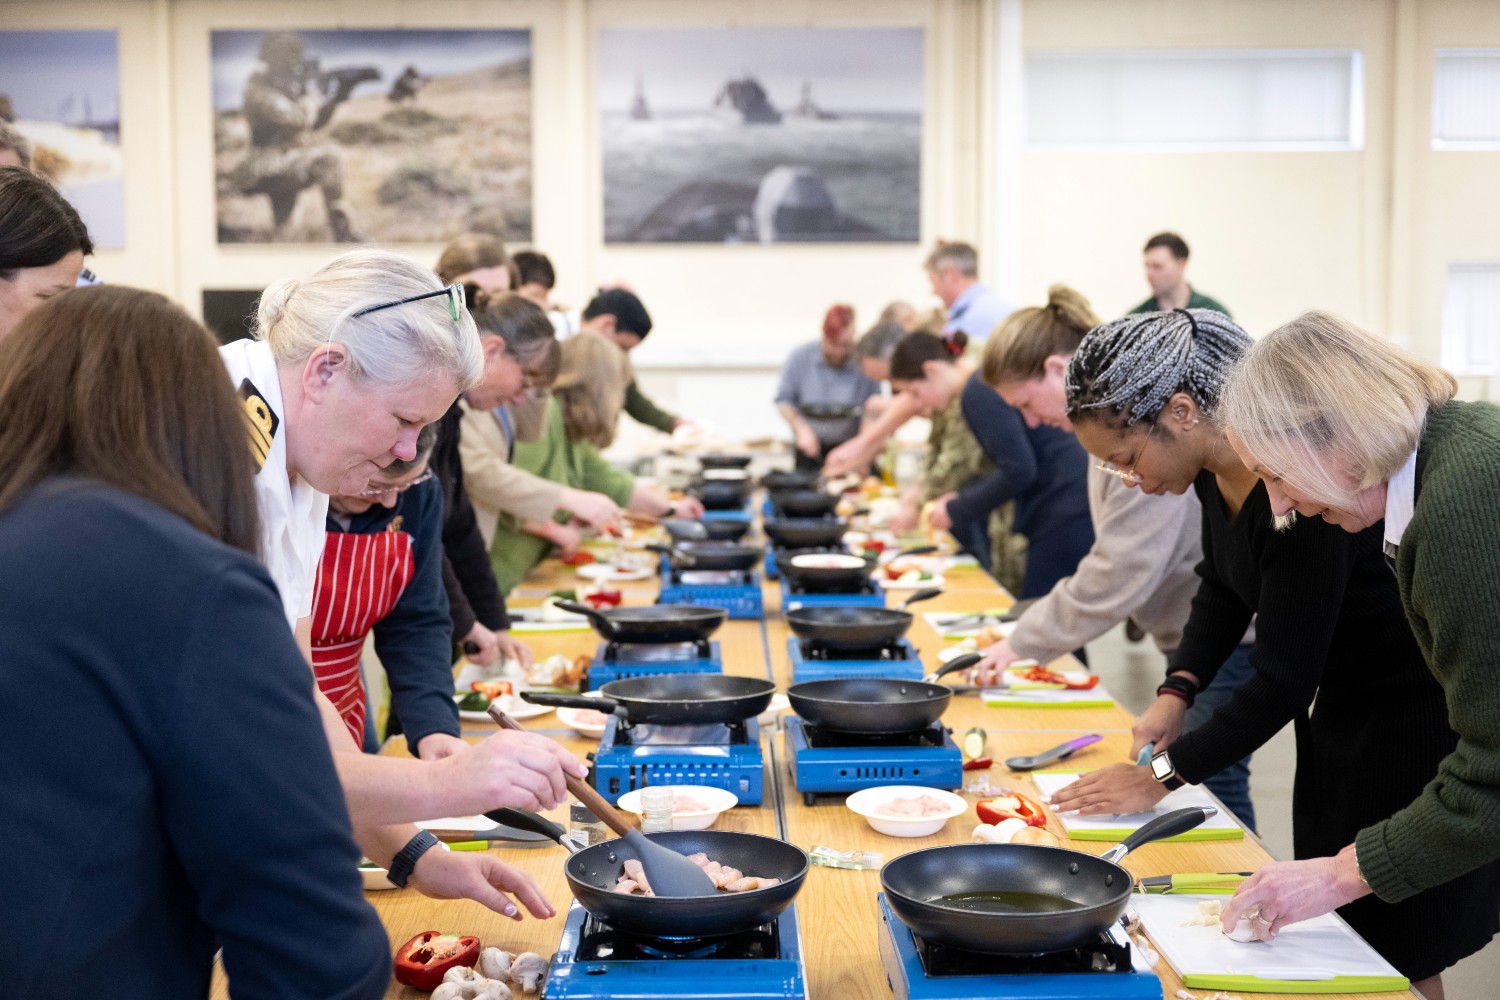 Long table with participants cooking at their individual stations.